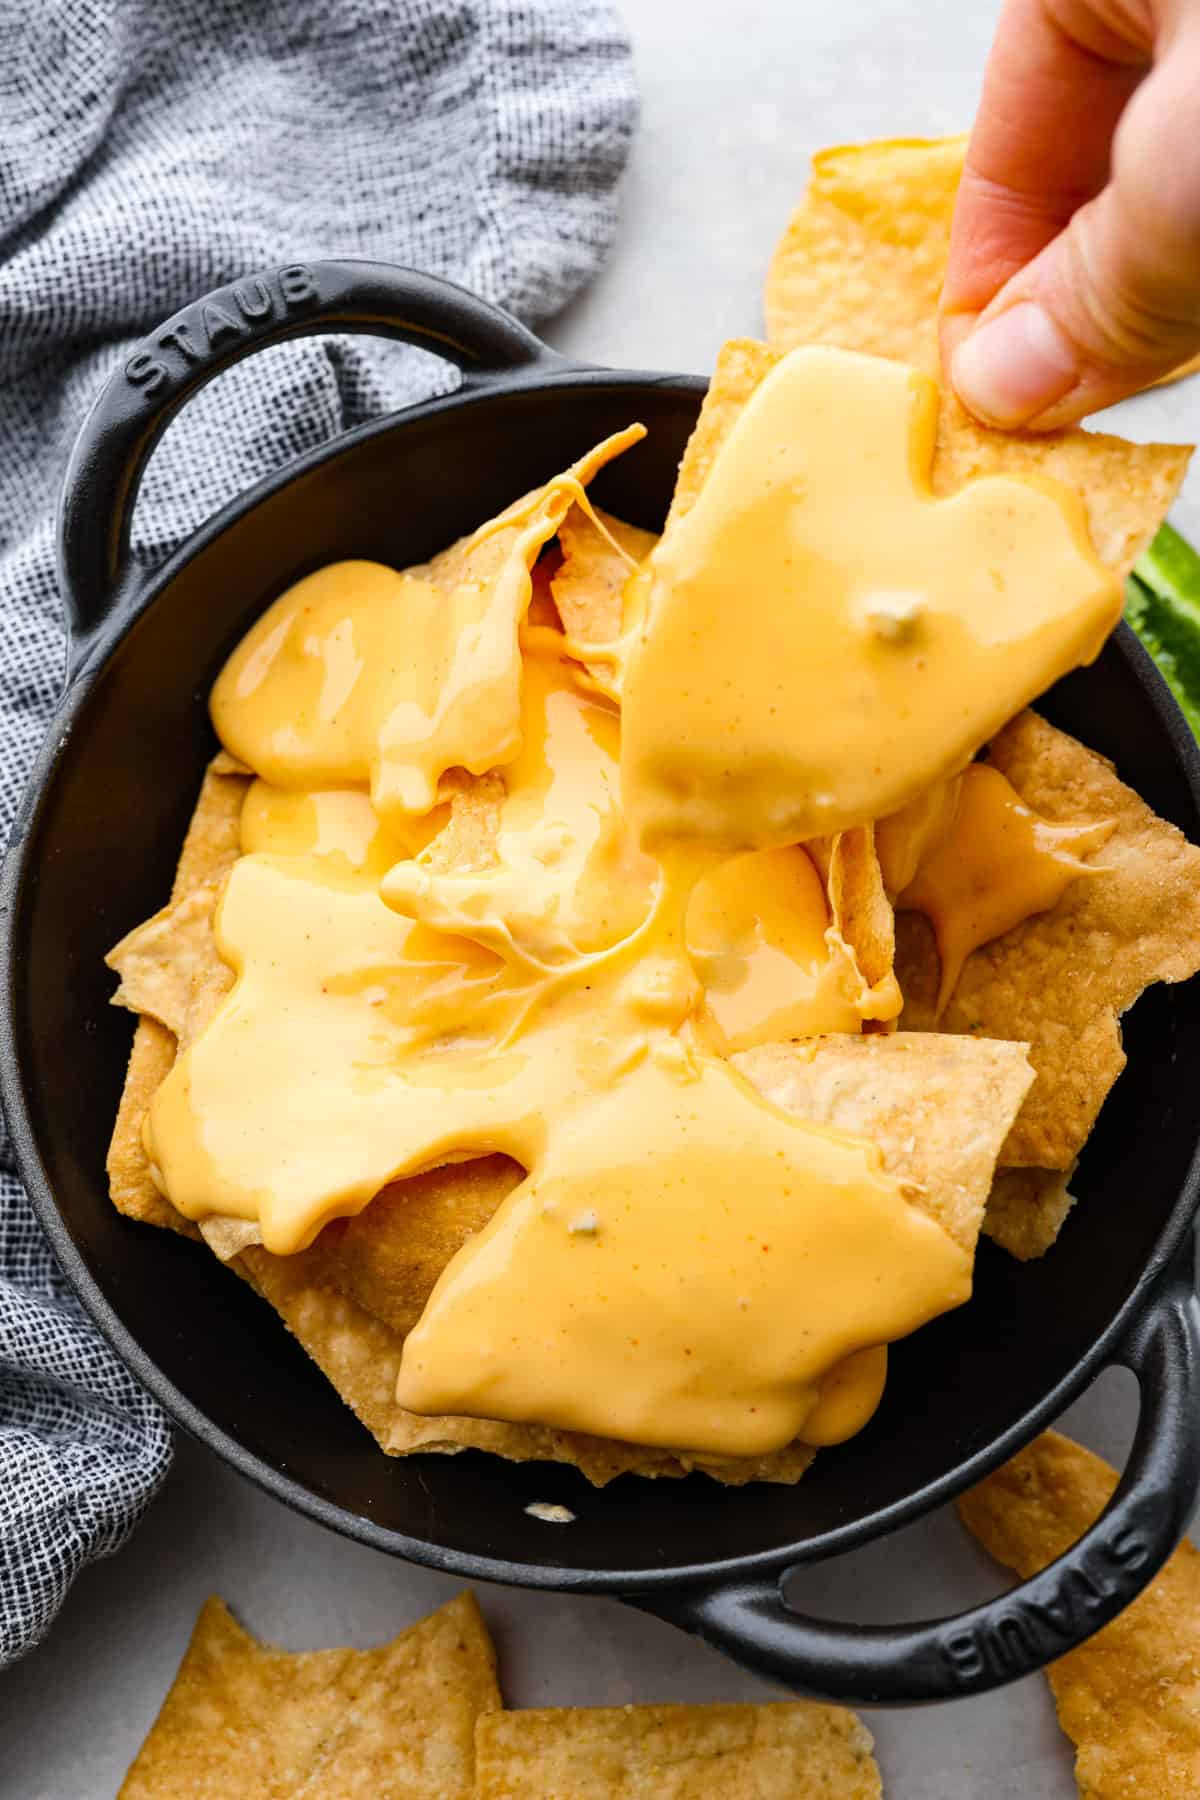 How to Reheat Nacho Cheese: Quick and Easy Tips - Bricks Chicago